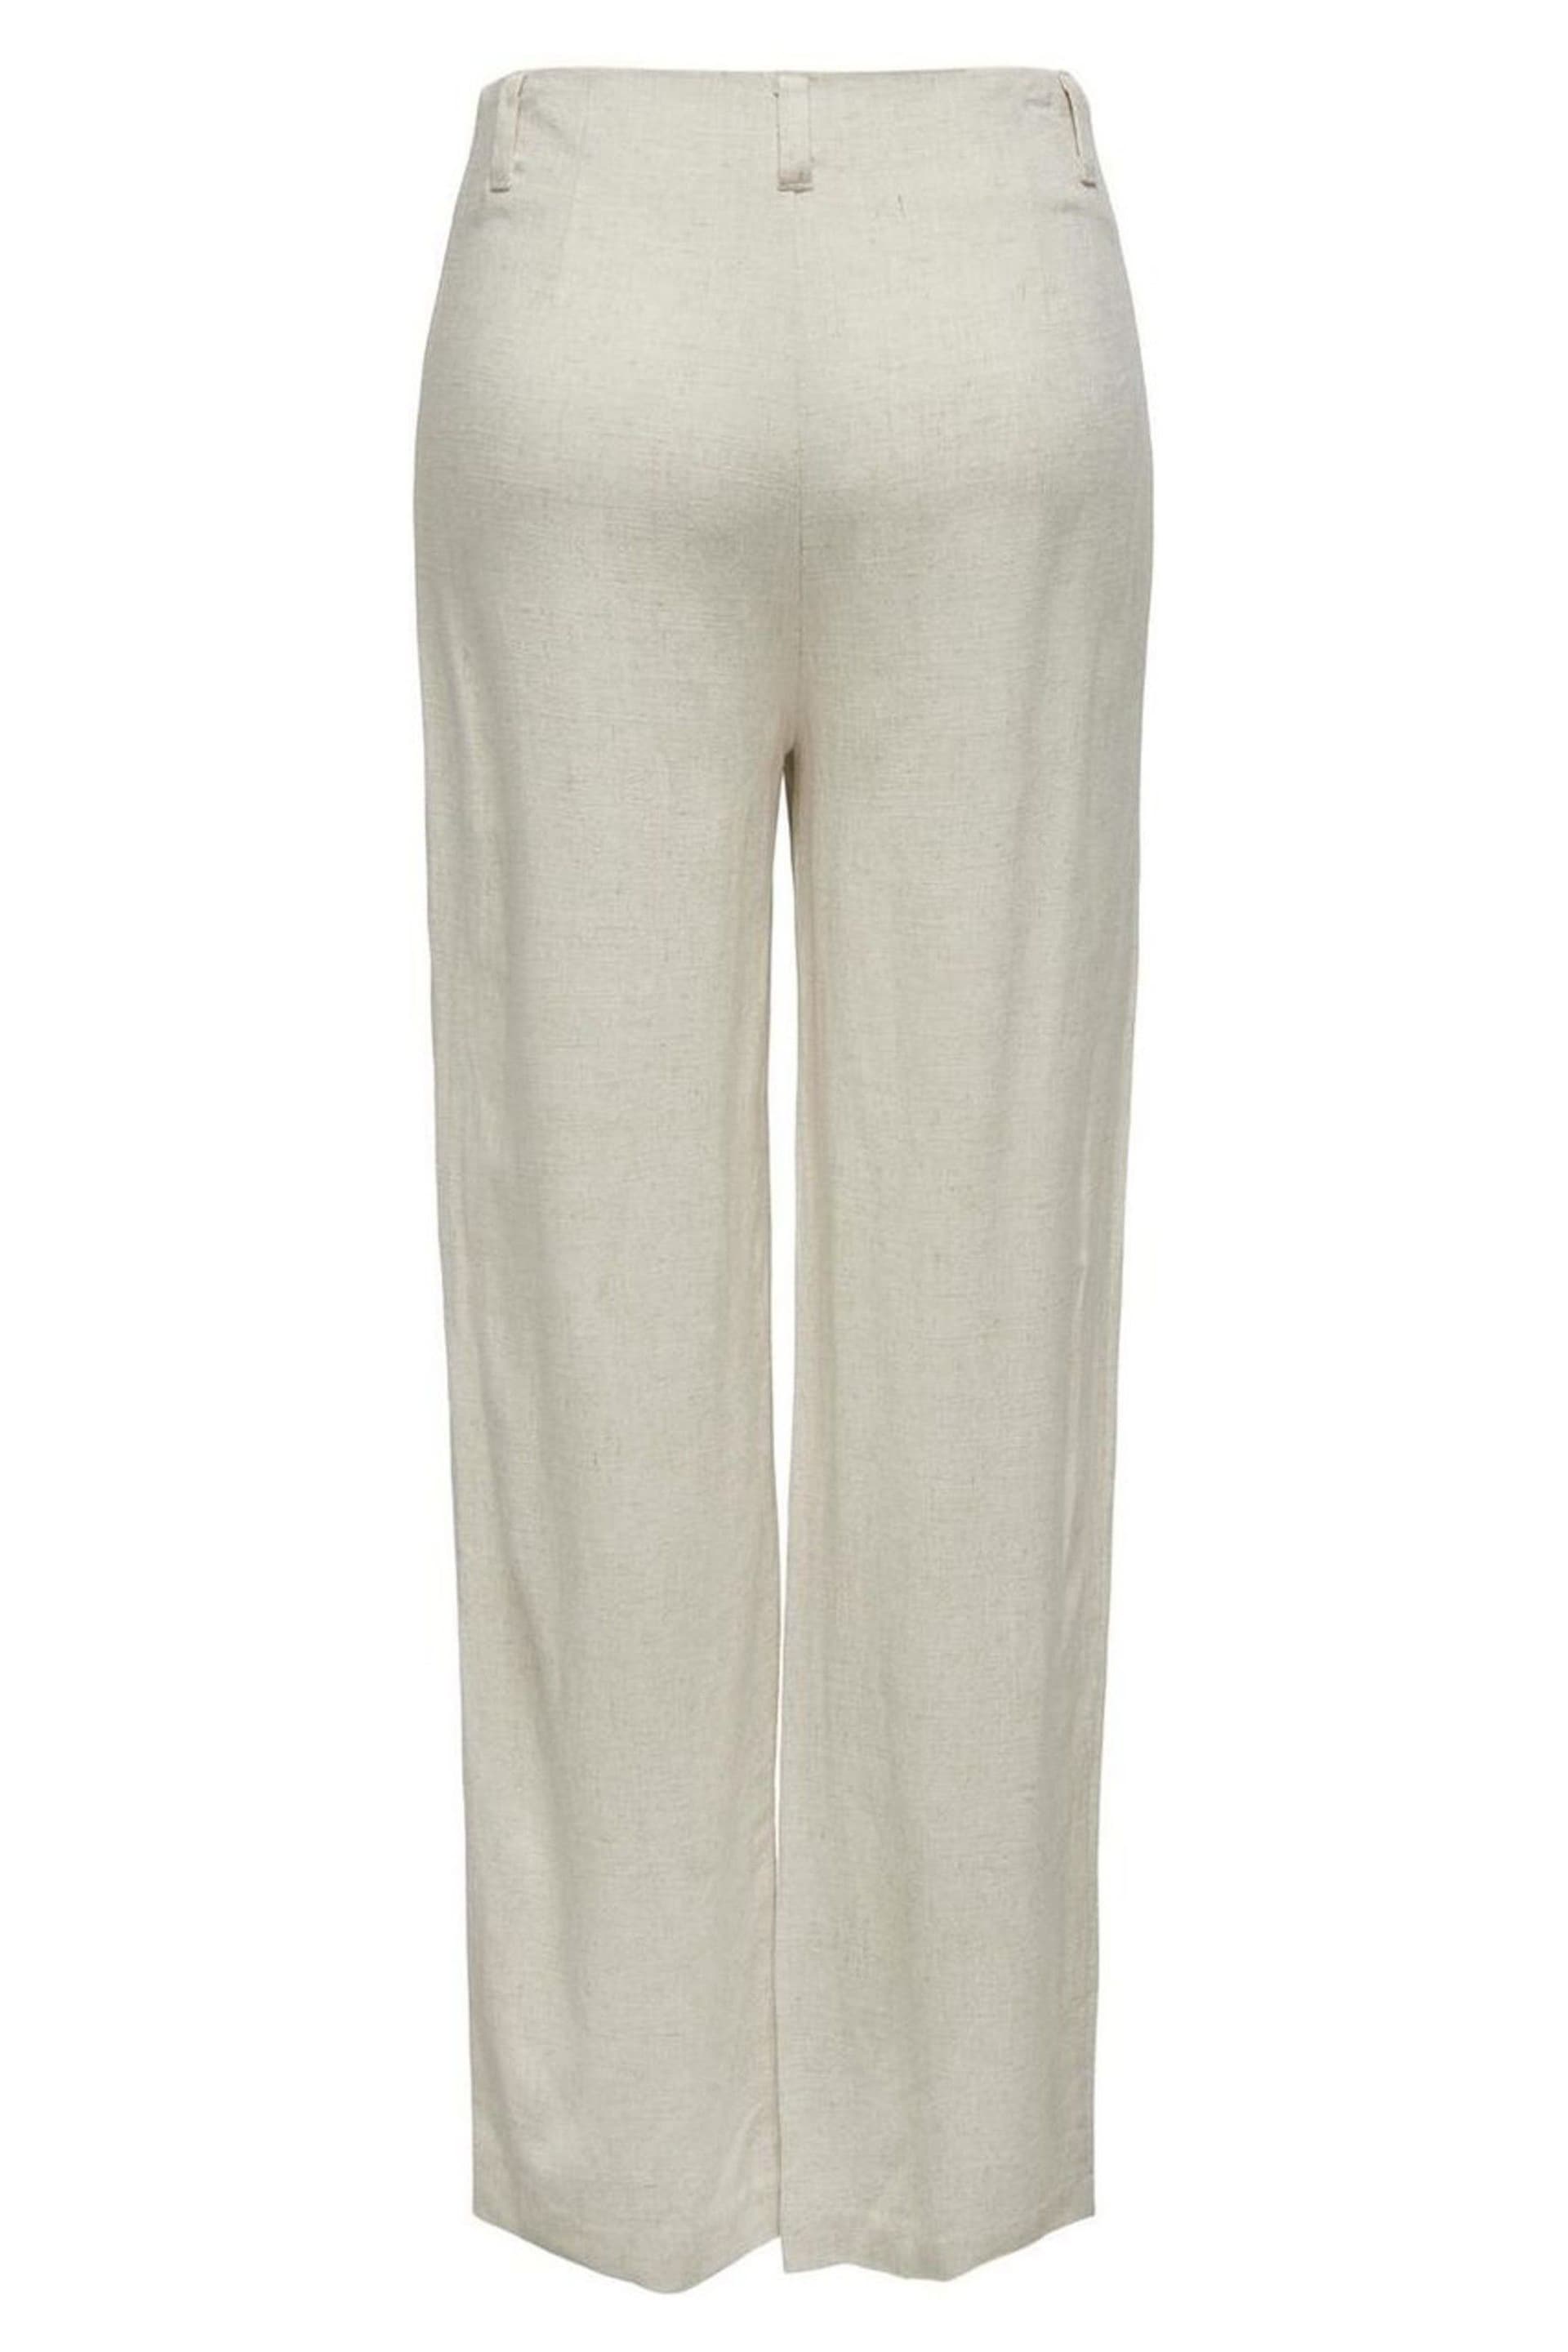 ONLY Cream Tailored Wide Leg Trousers With A Touch Of Linen - Image 2 of 3